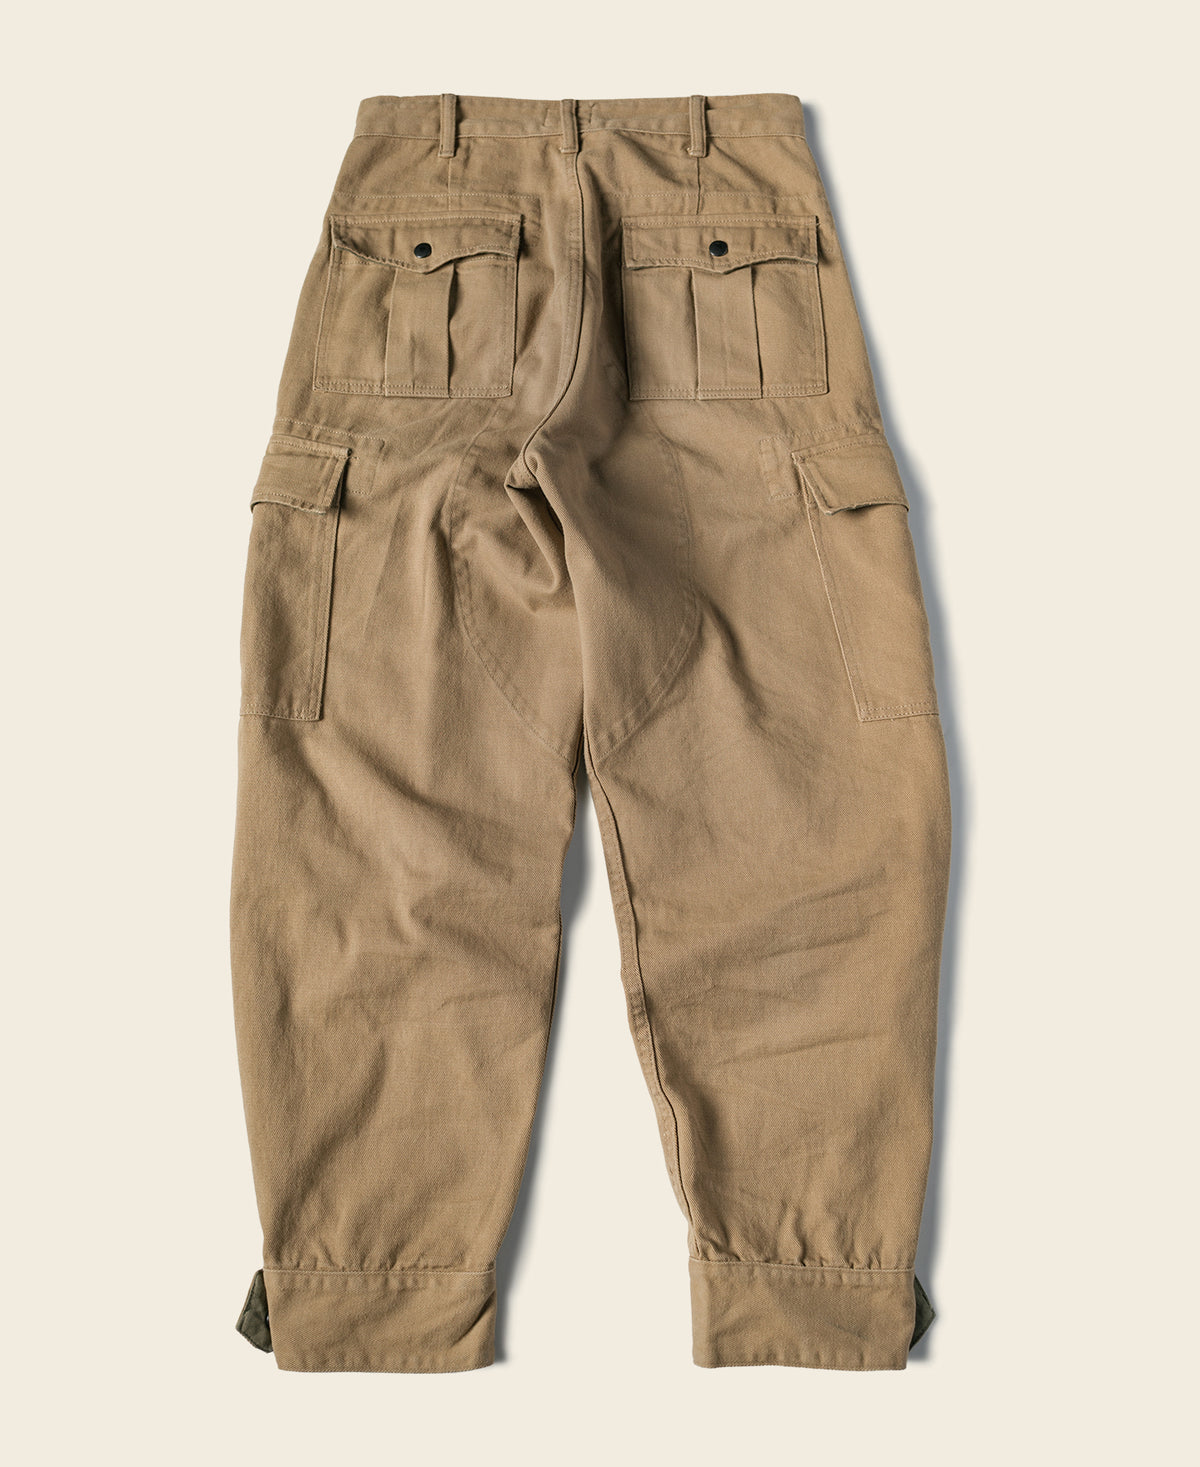 13 oz Cotton Twill Relaxed Fit Field Pants